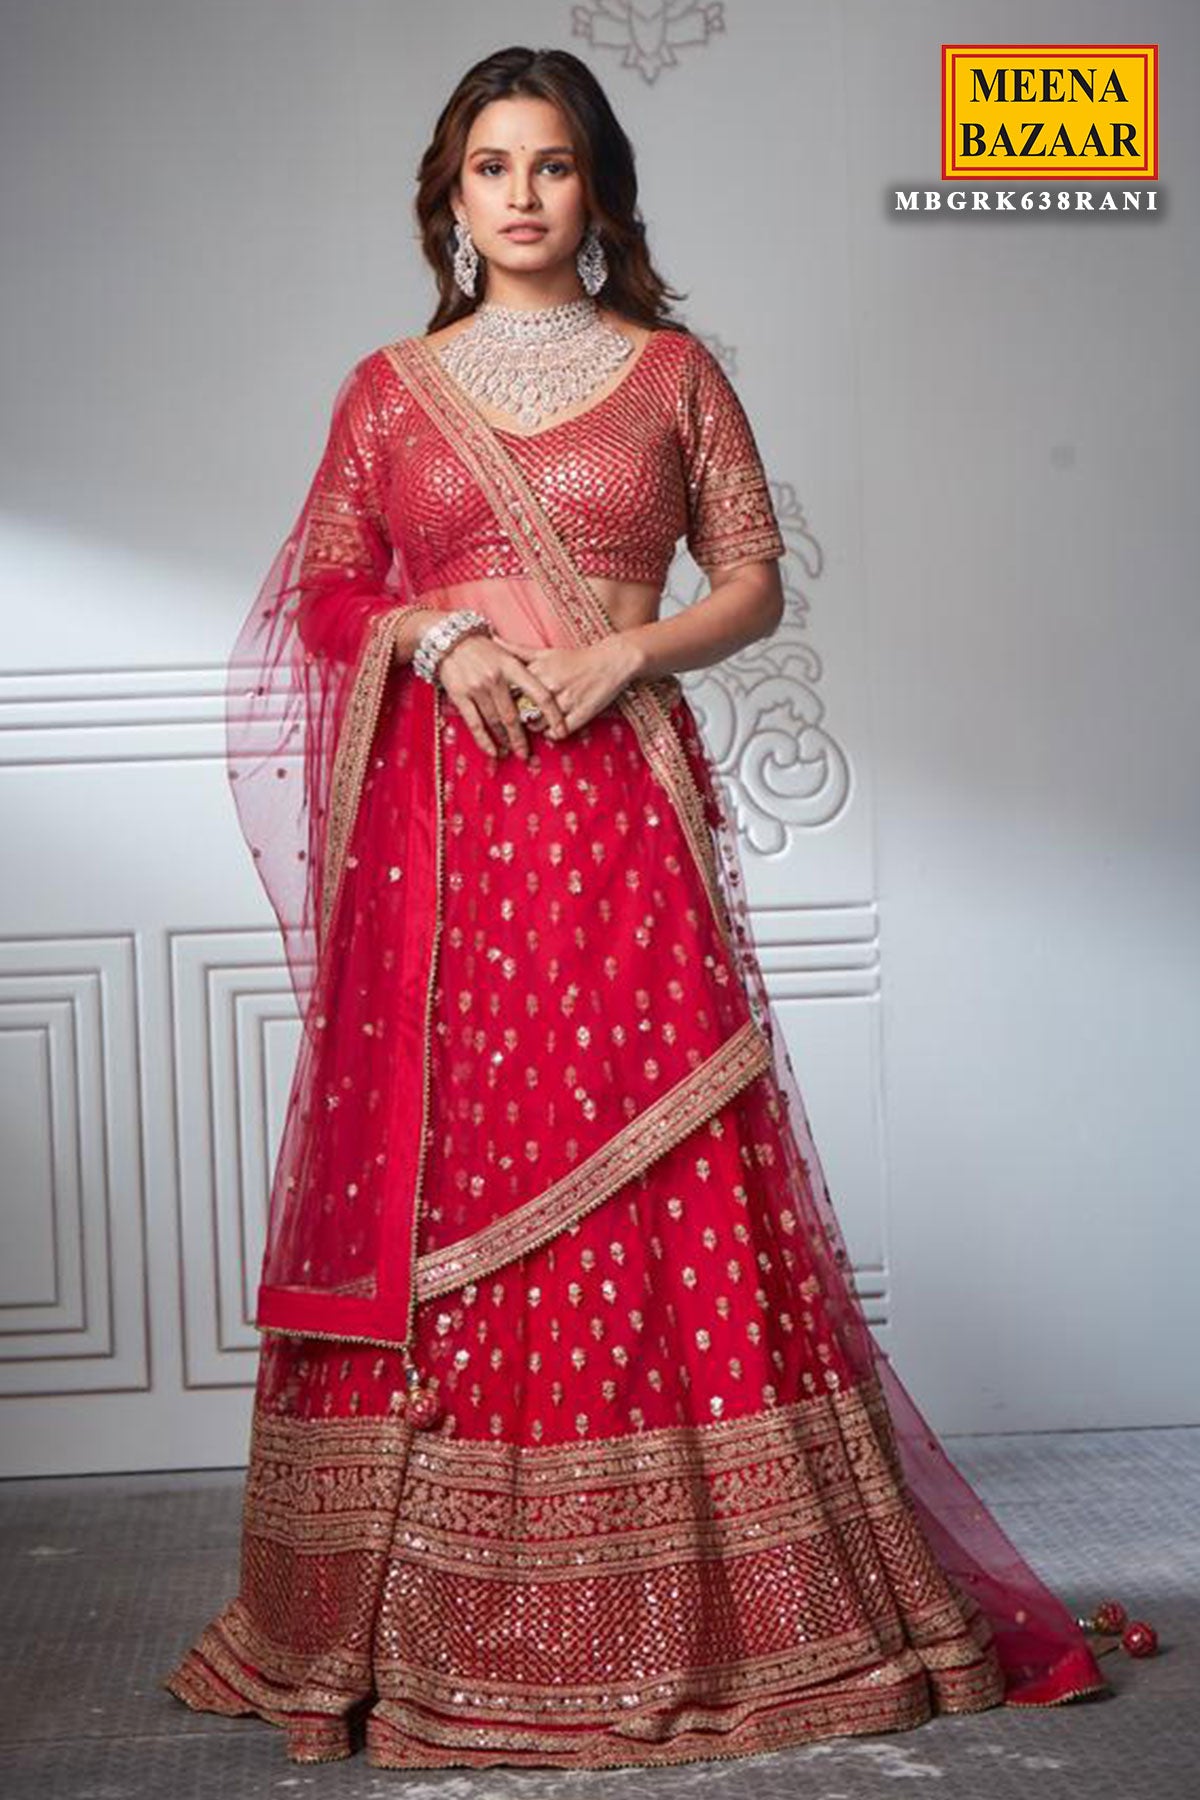 Top 50 Bridal Stores In Delhi For Your Wedding Shopping